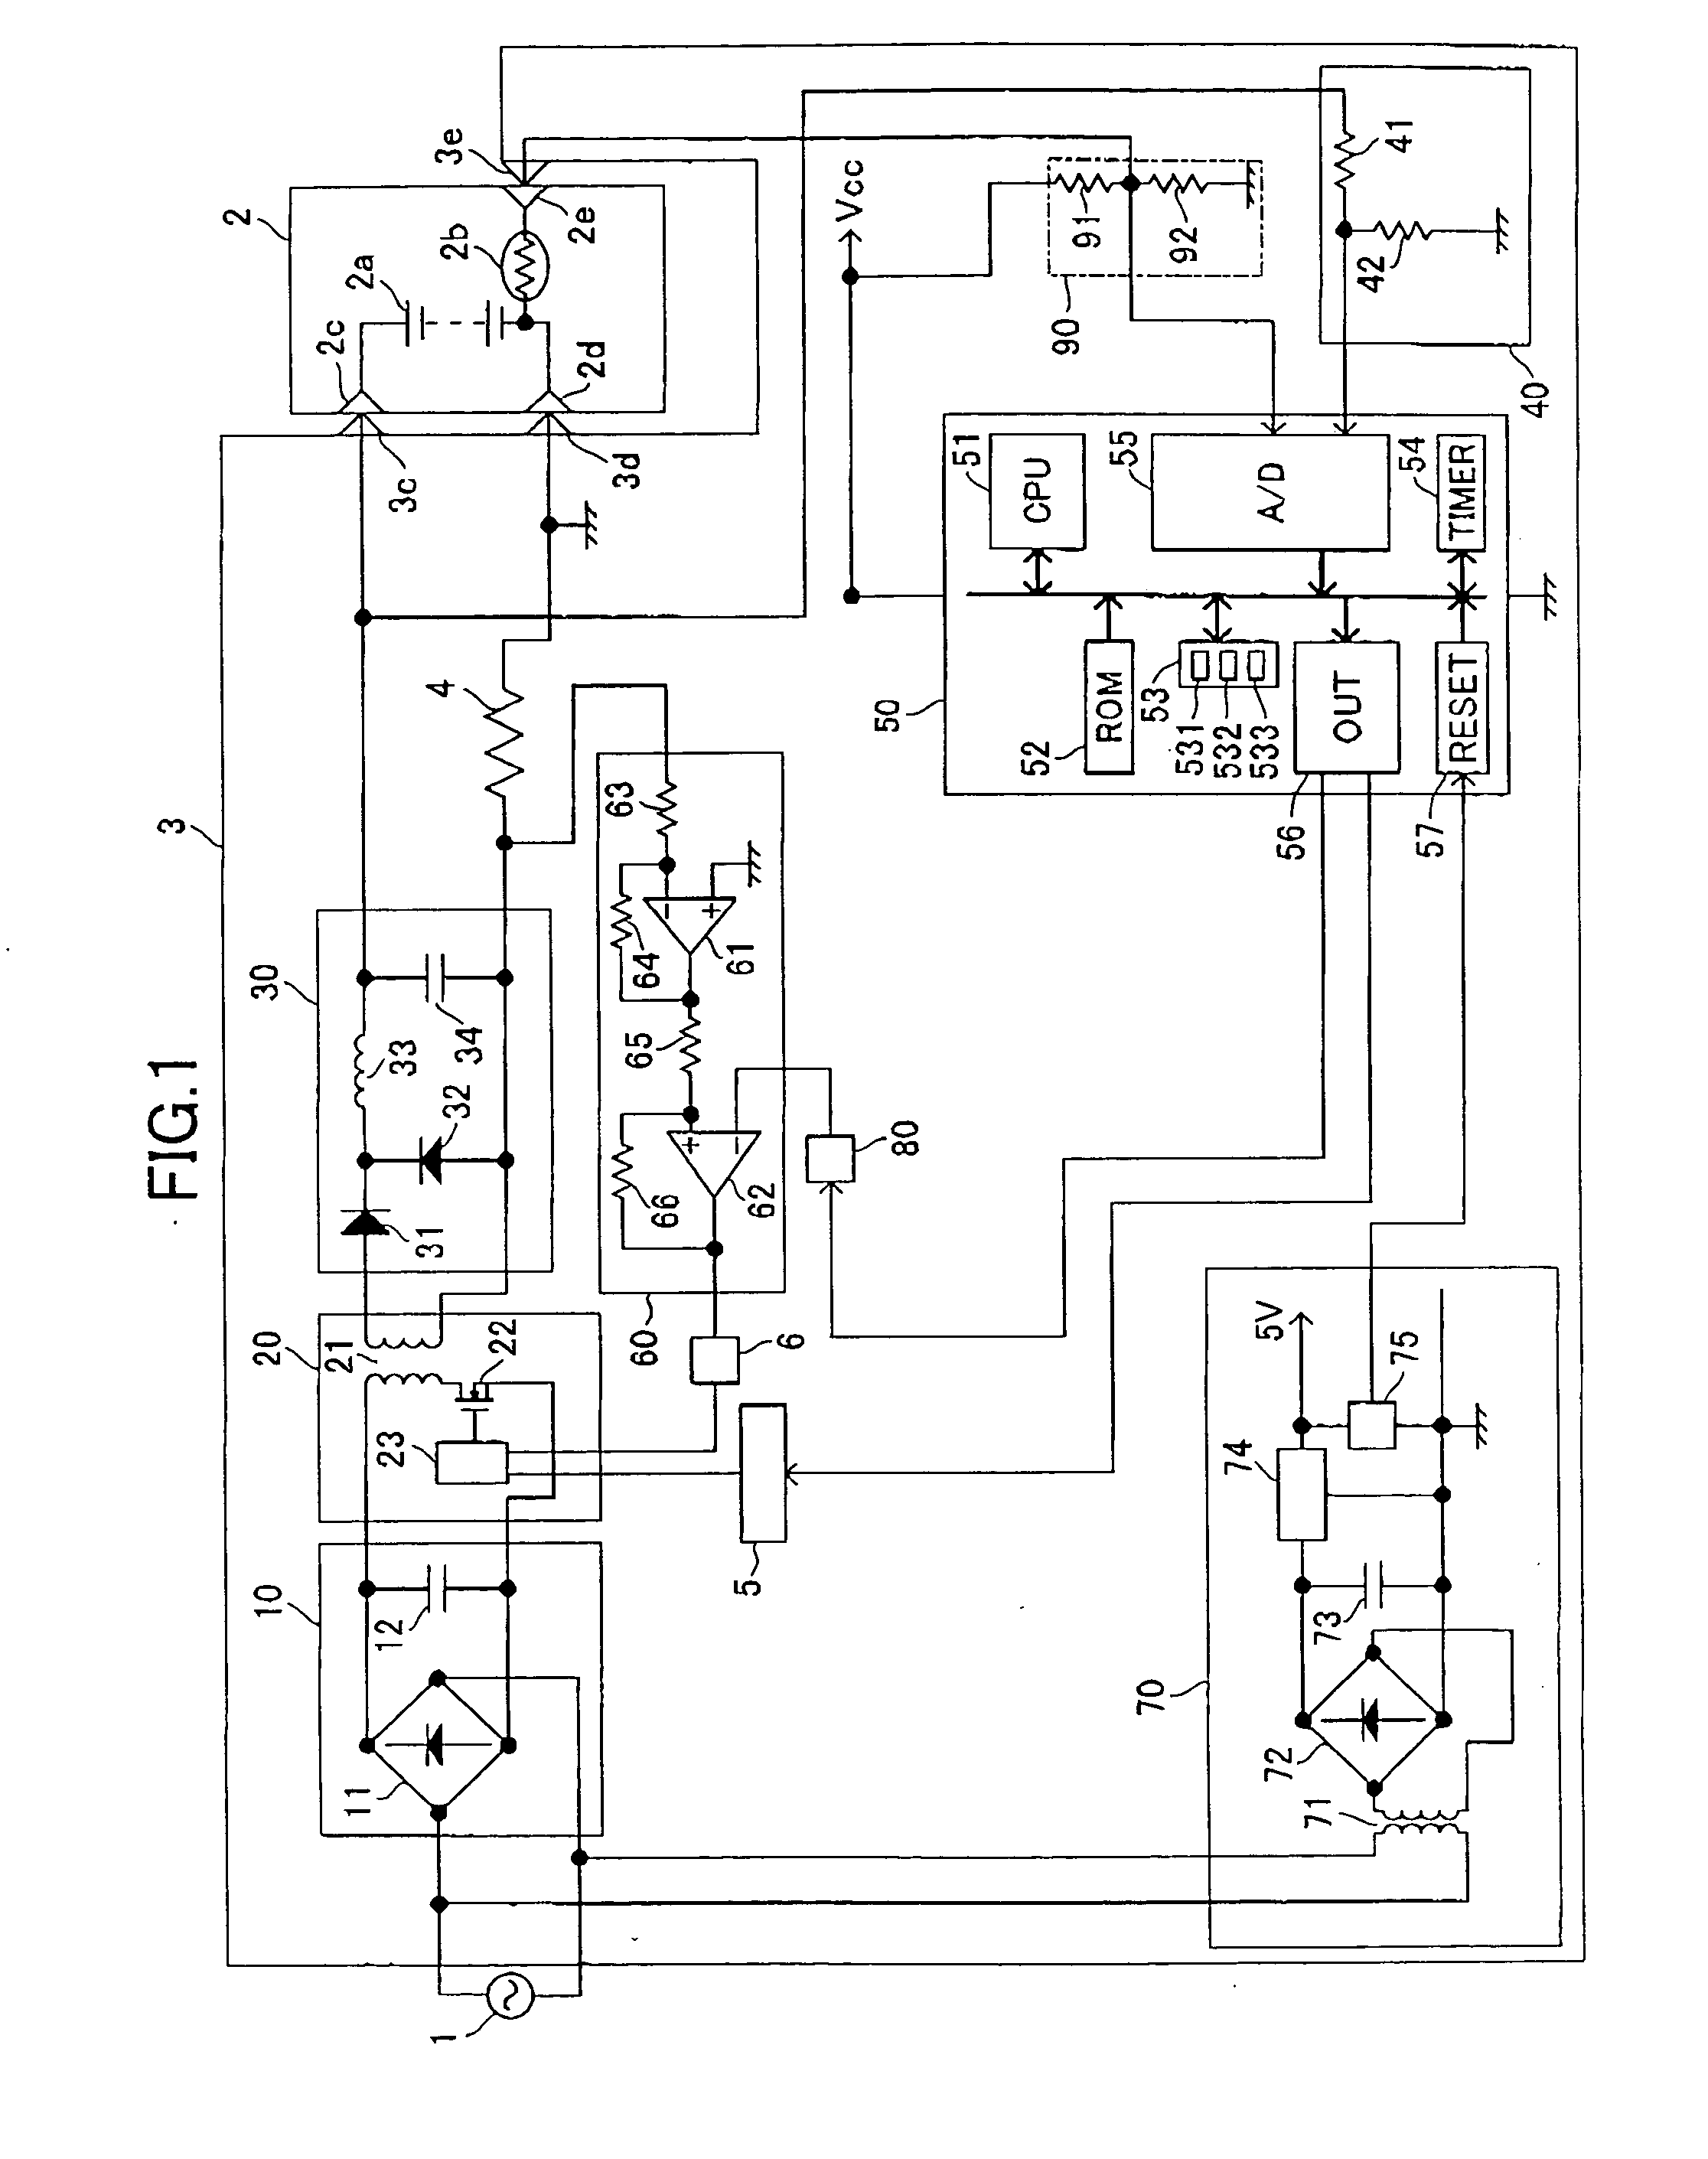 Battery charger capable of accurately detecting battery temperature for full charge determination